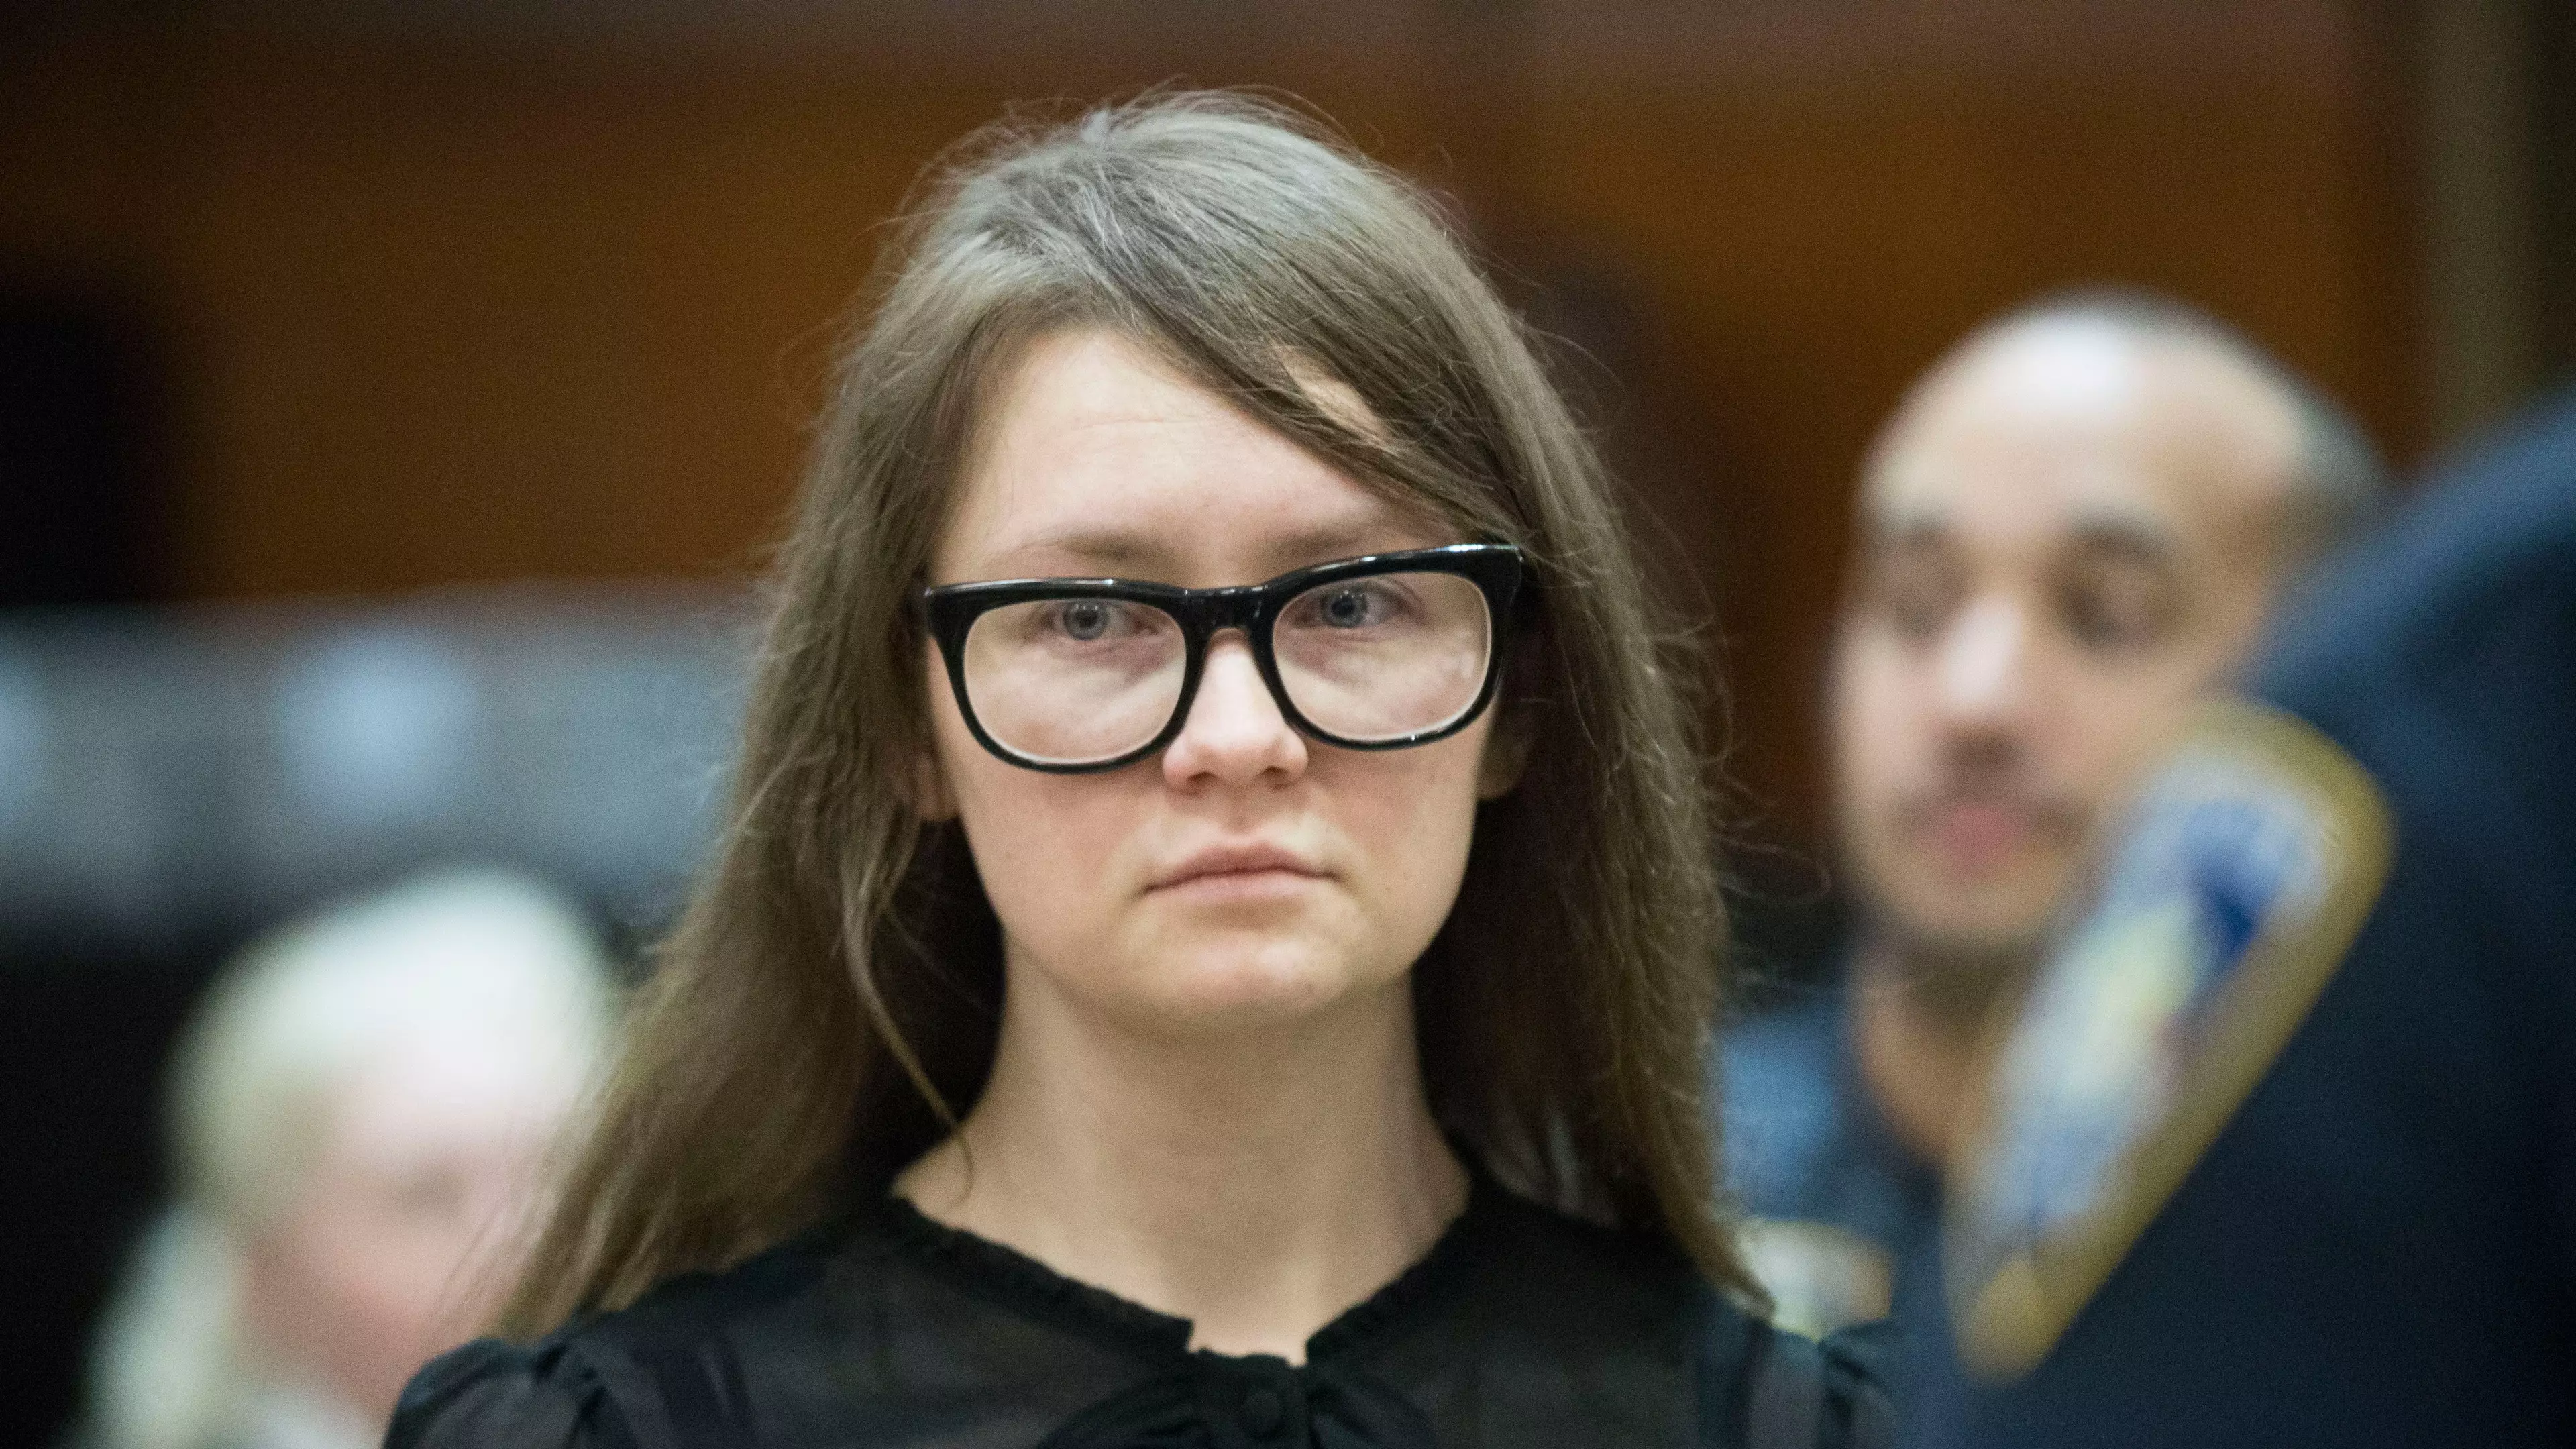 Anna Delvey's crime will become a Netflix TV series